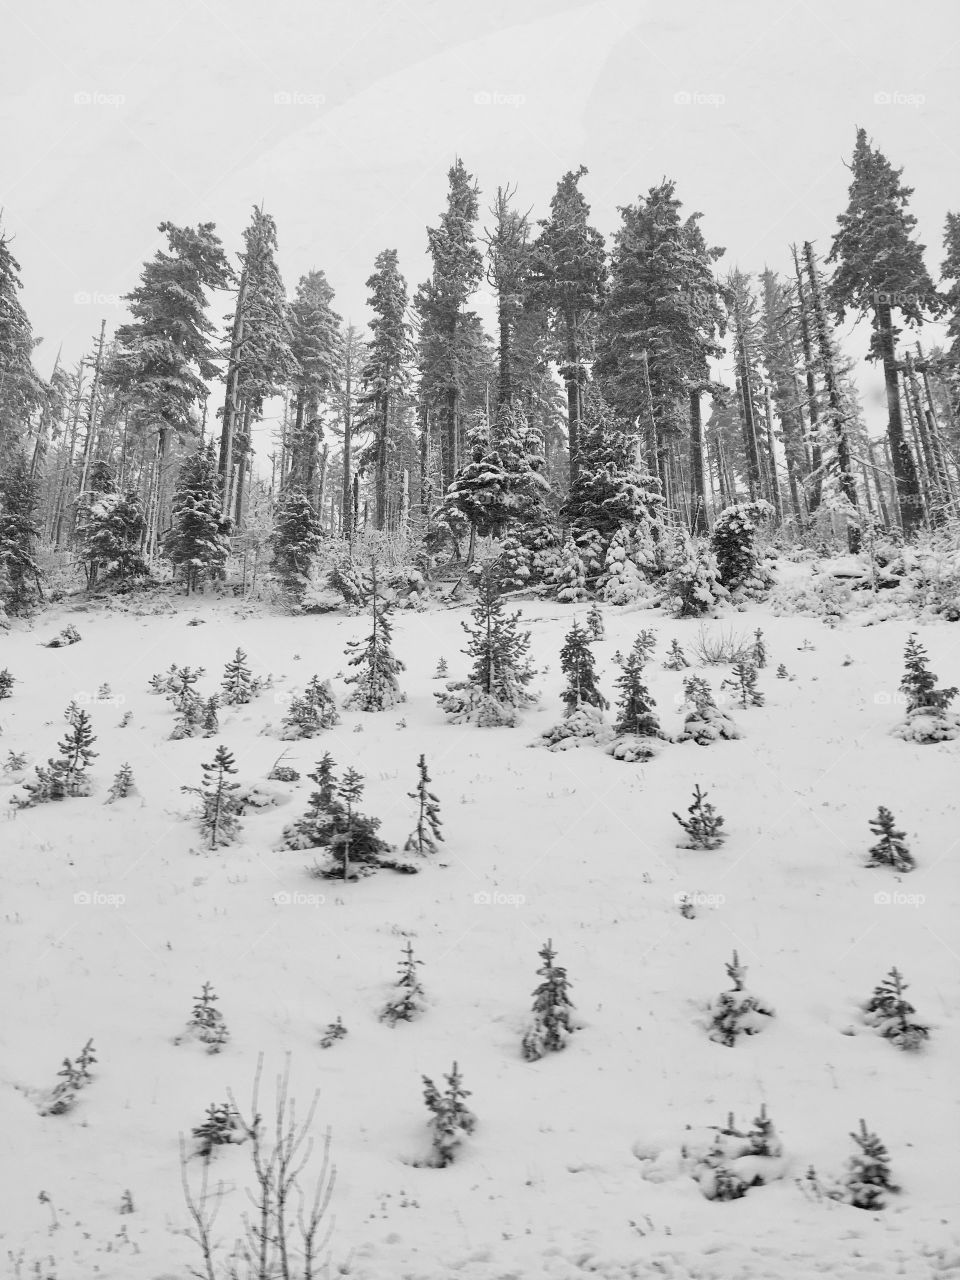 Over the pass to Bend Oregon. Snow on tall and short Christmas trees. 